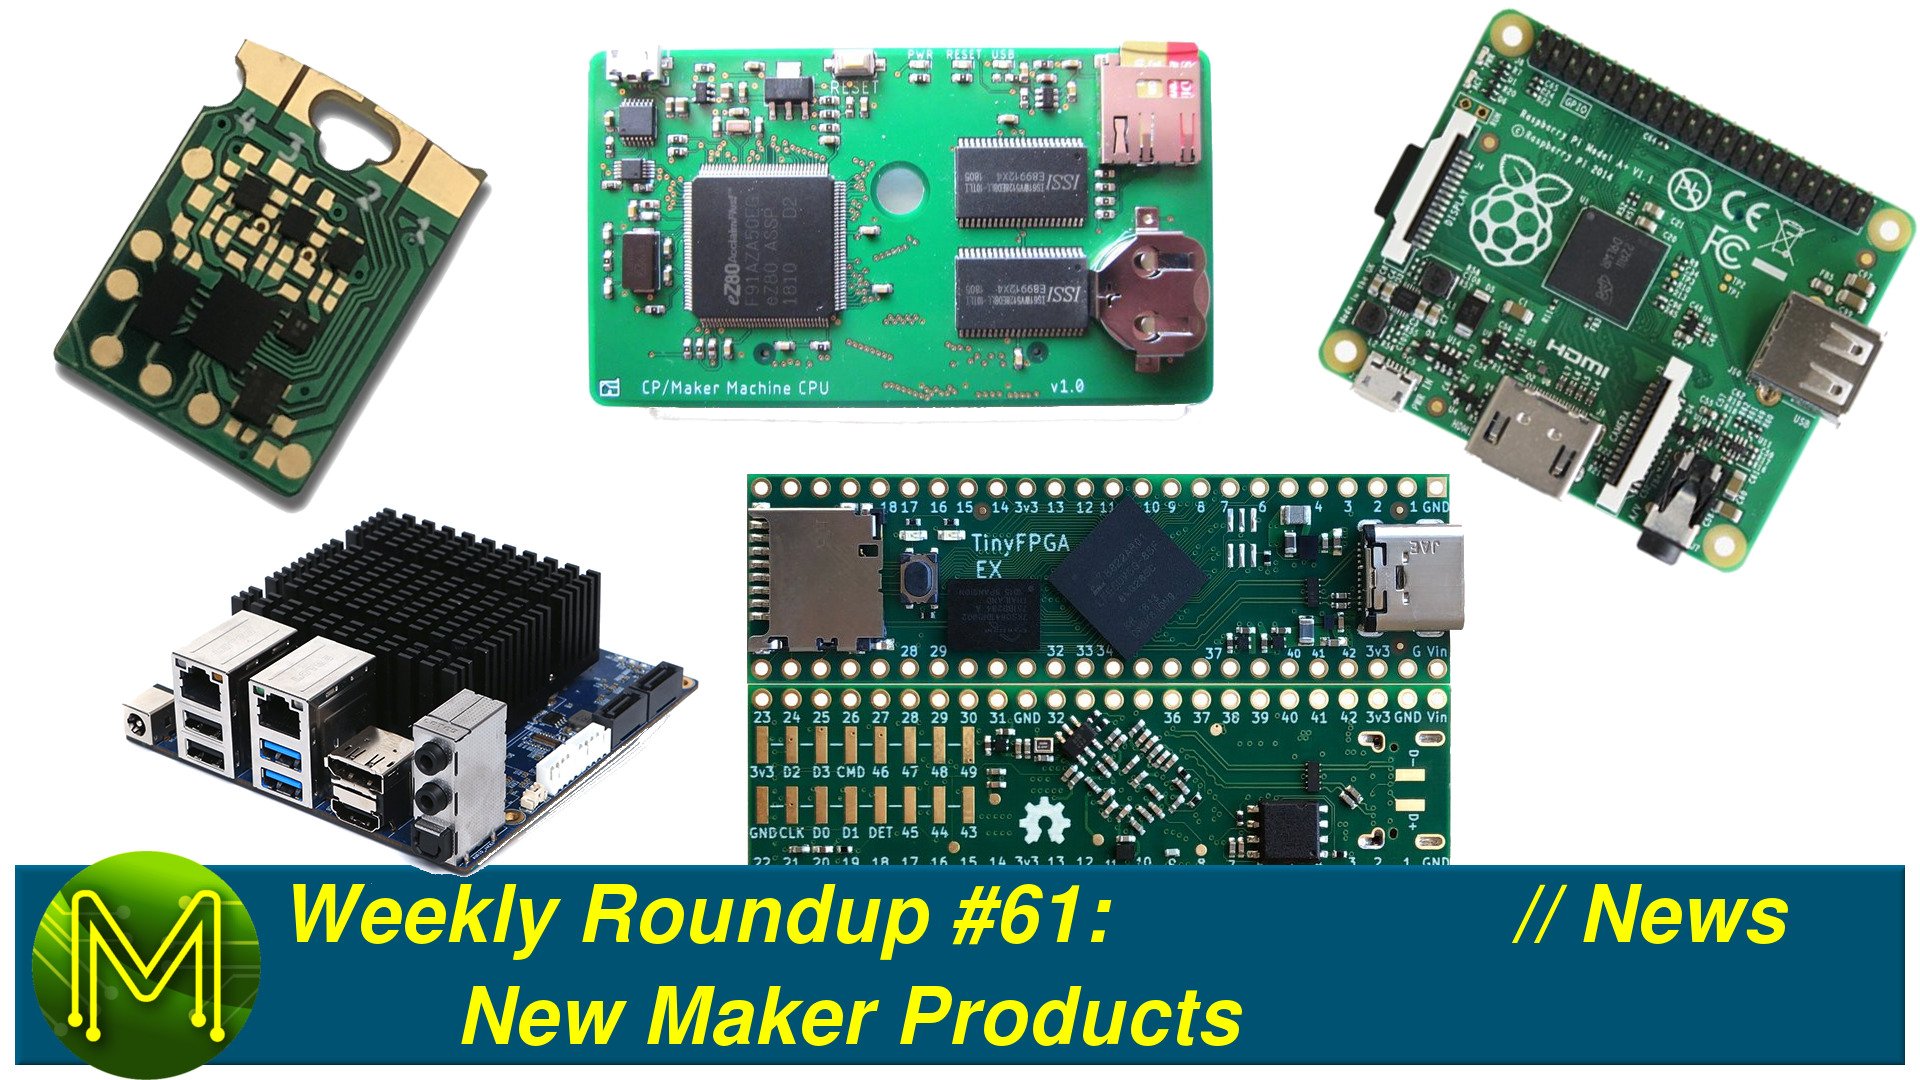 Weekly Roundup #61: New Maker Products // News